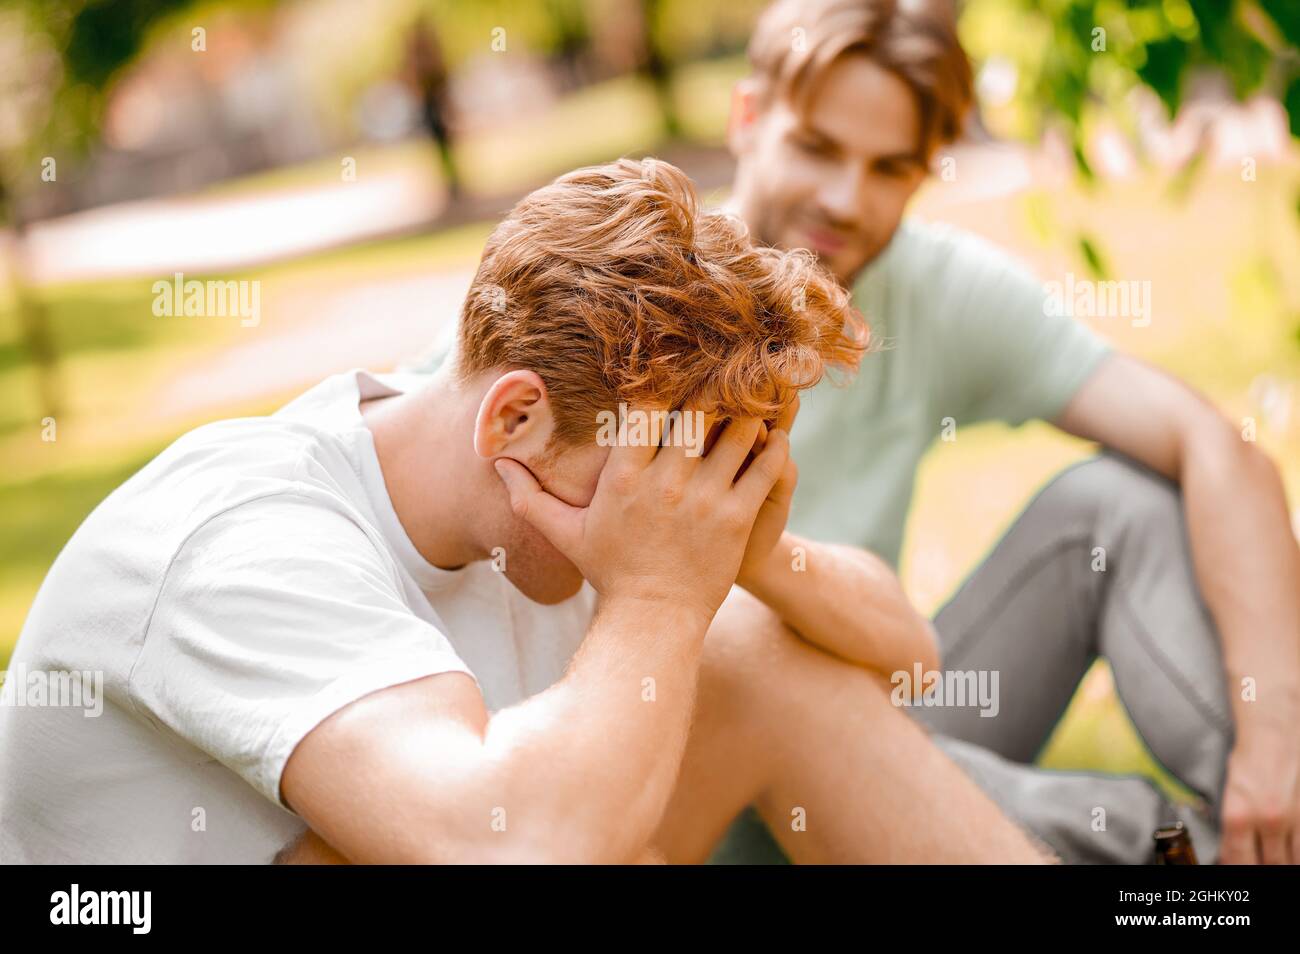 Guy hiding his face behind hands and friend Stock Photo